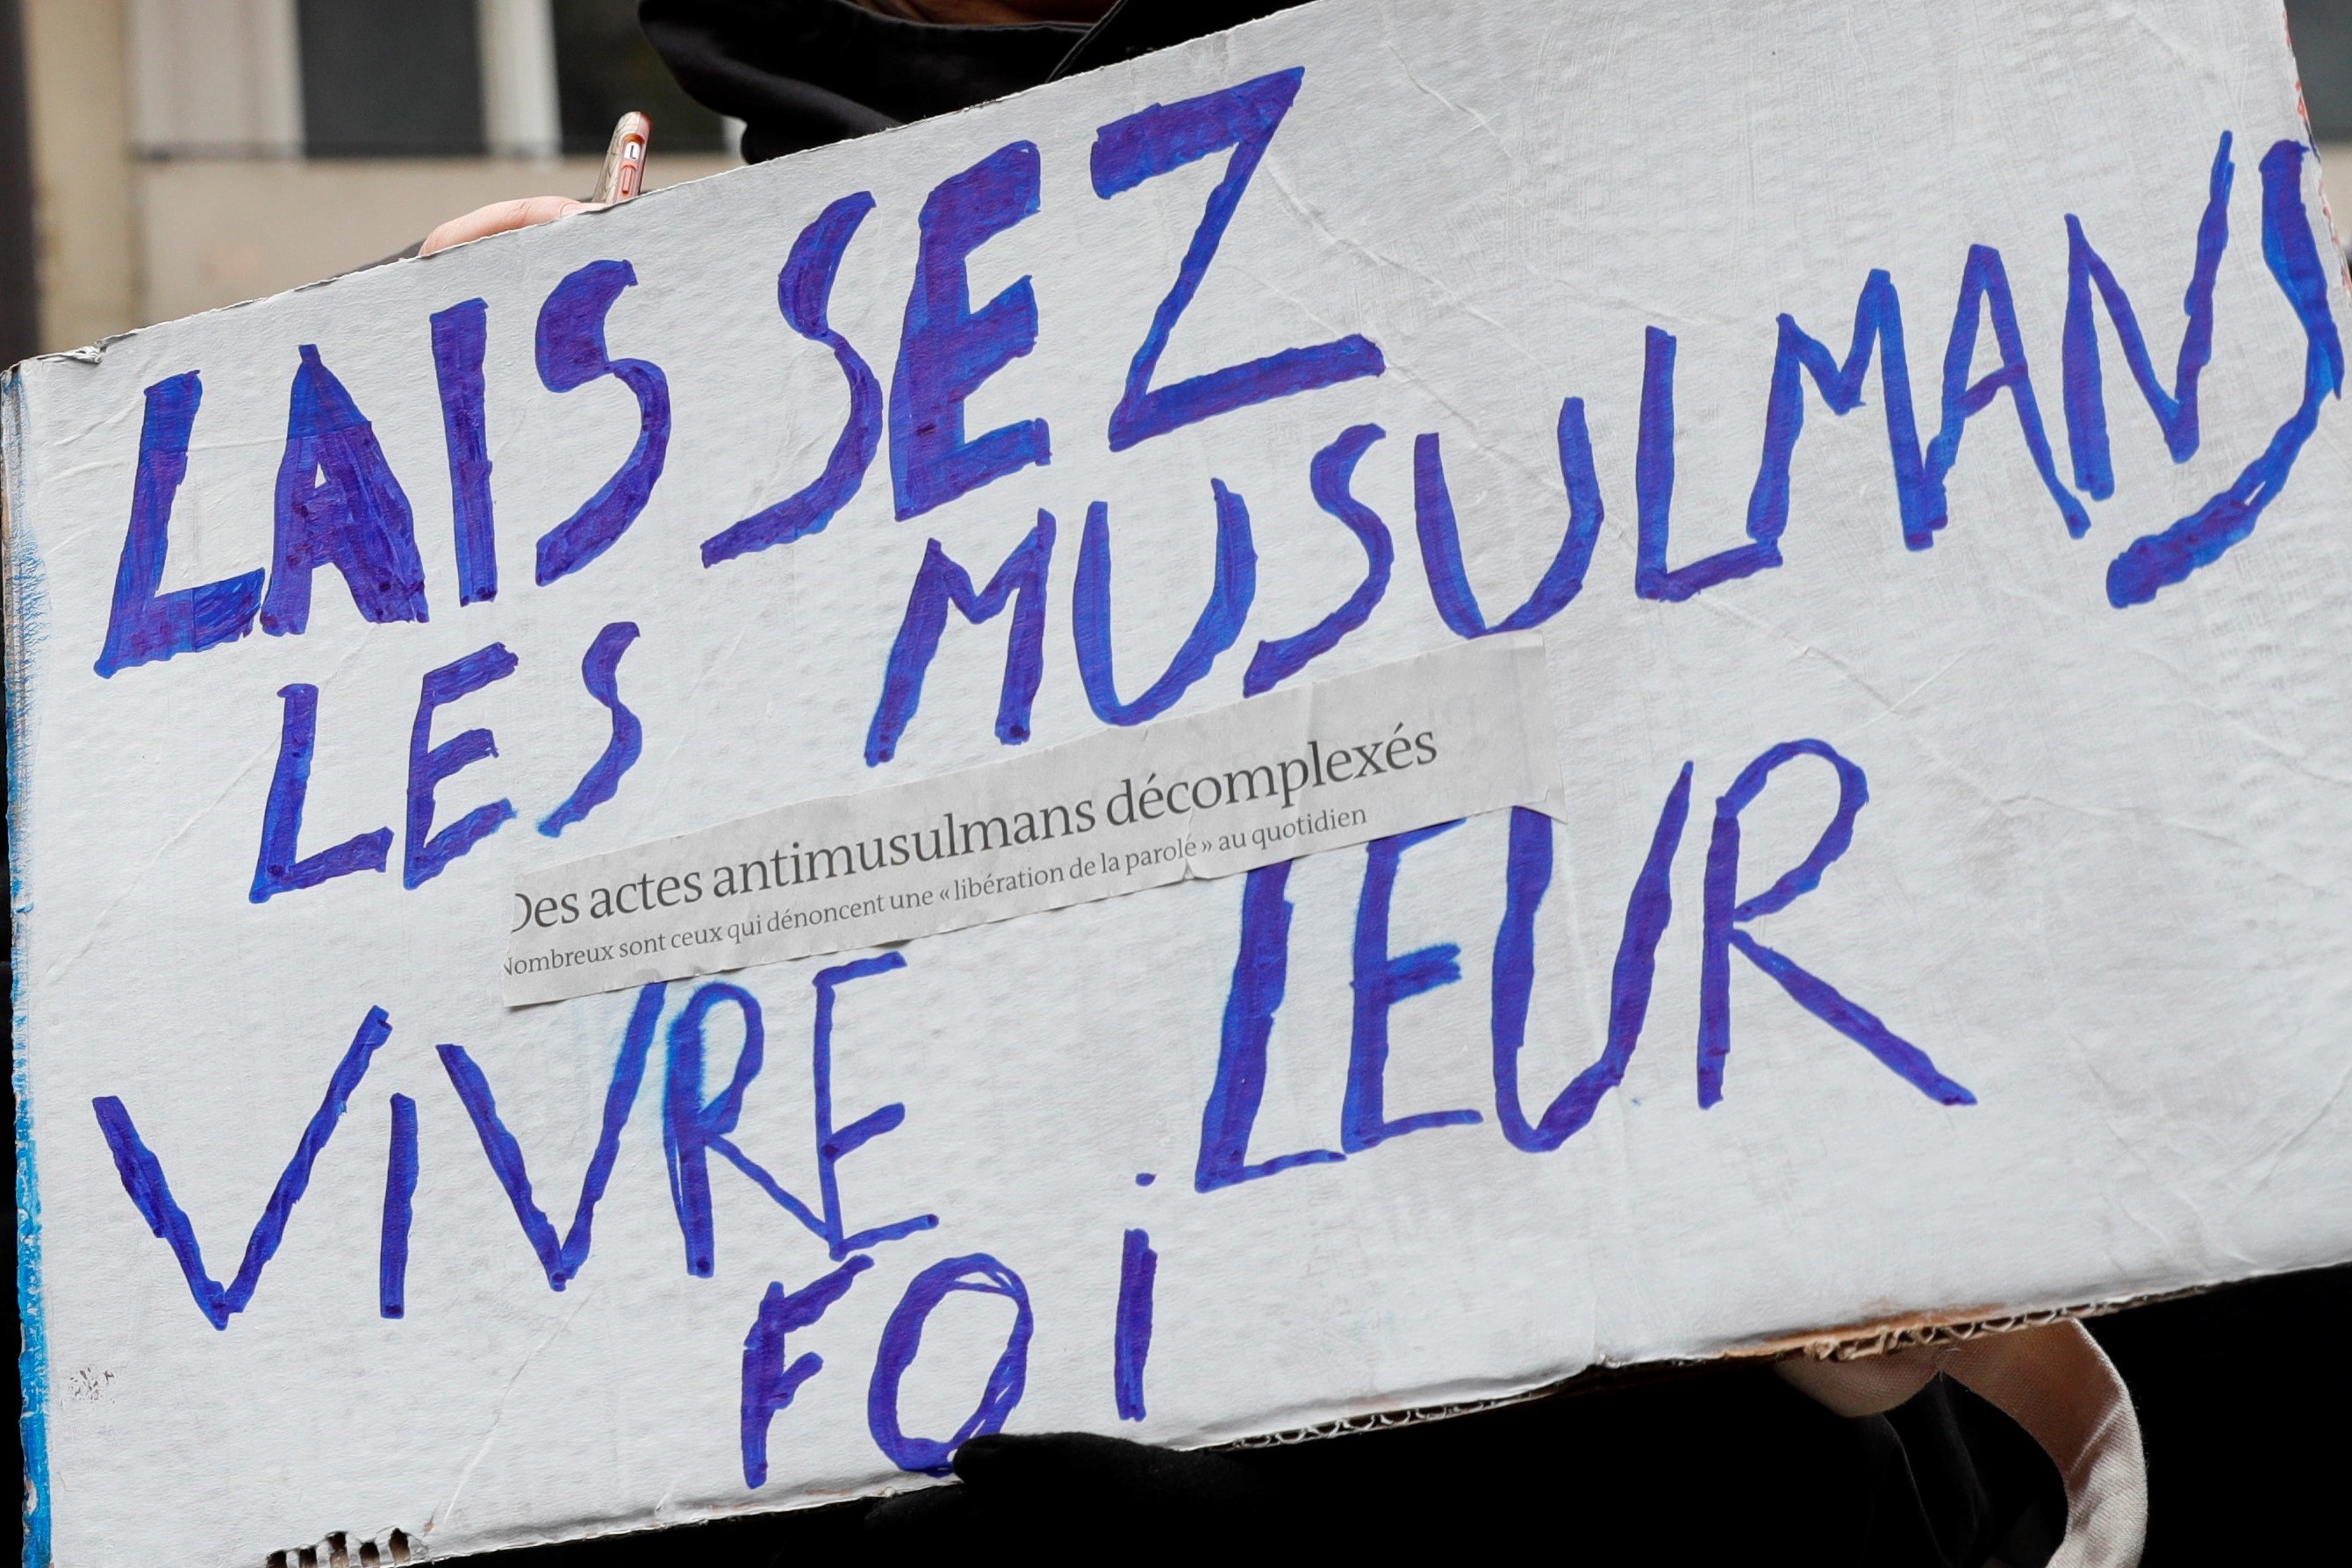 A placard held by a protester reading "Let Muslims live their faith" during march in front of the Gare du Nord, in Paris to protest against Islamophobia, on November 10, 2019.